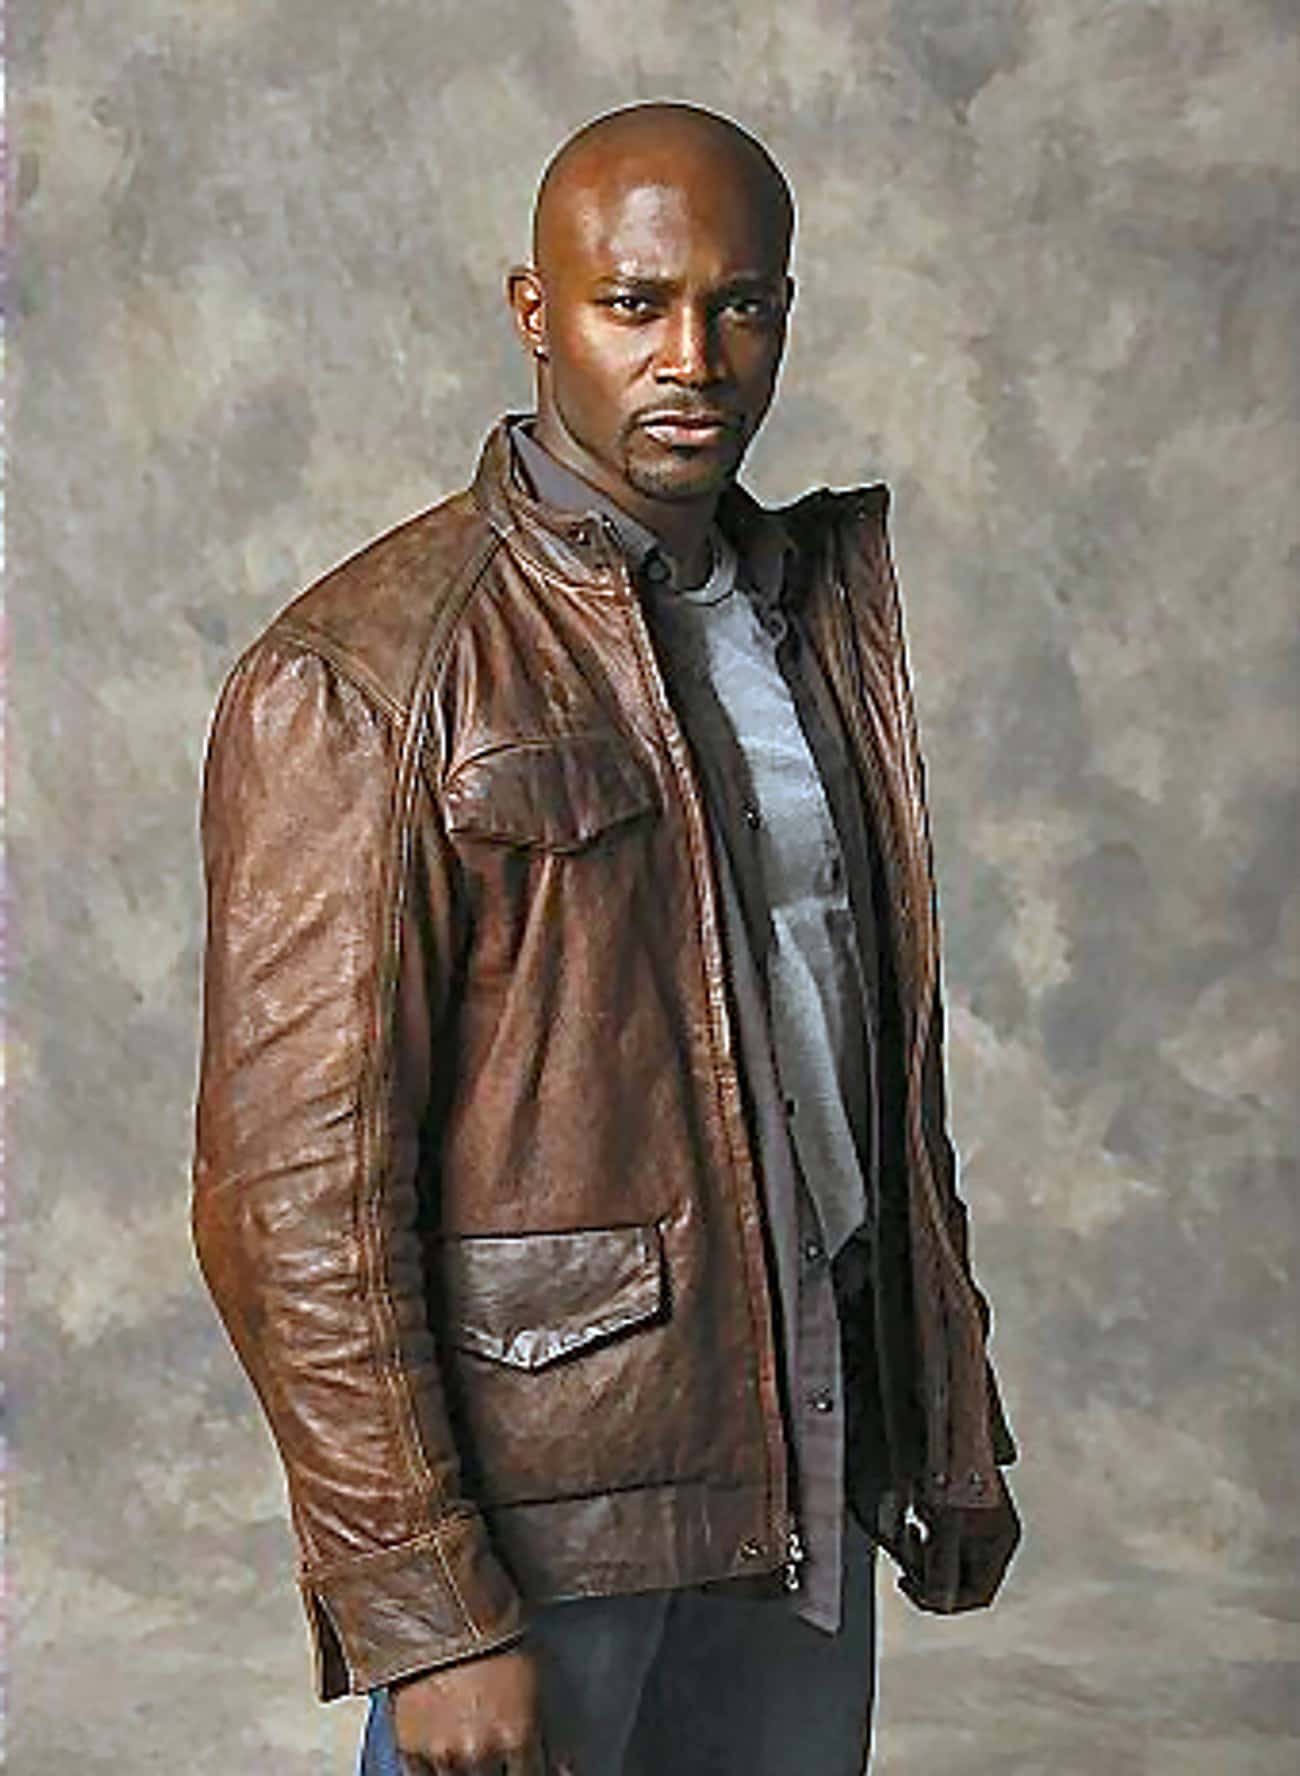 Taye Diggs in Brando Leather Jacket